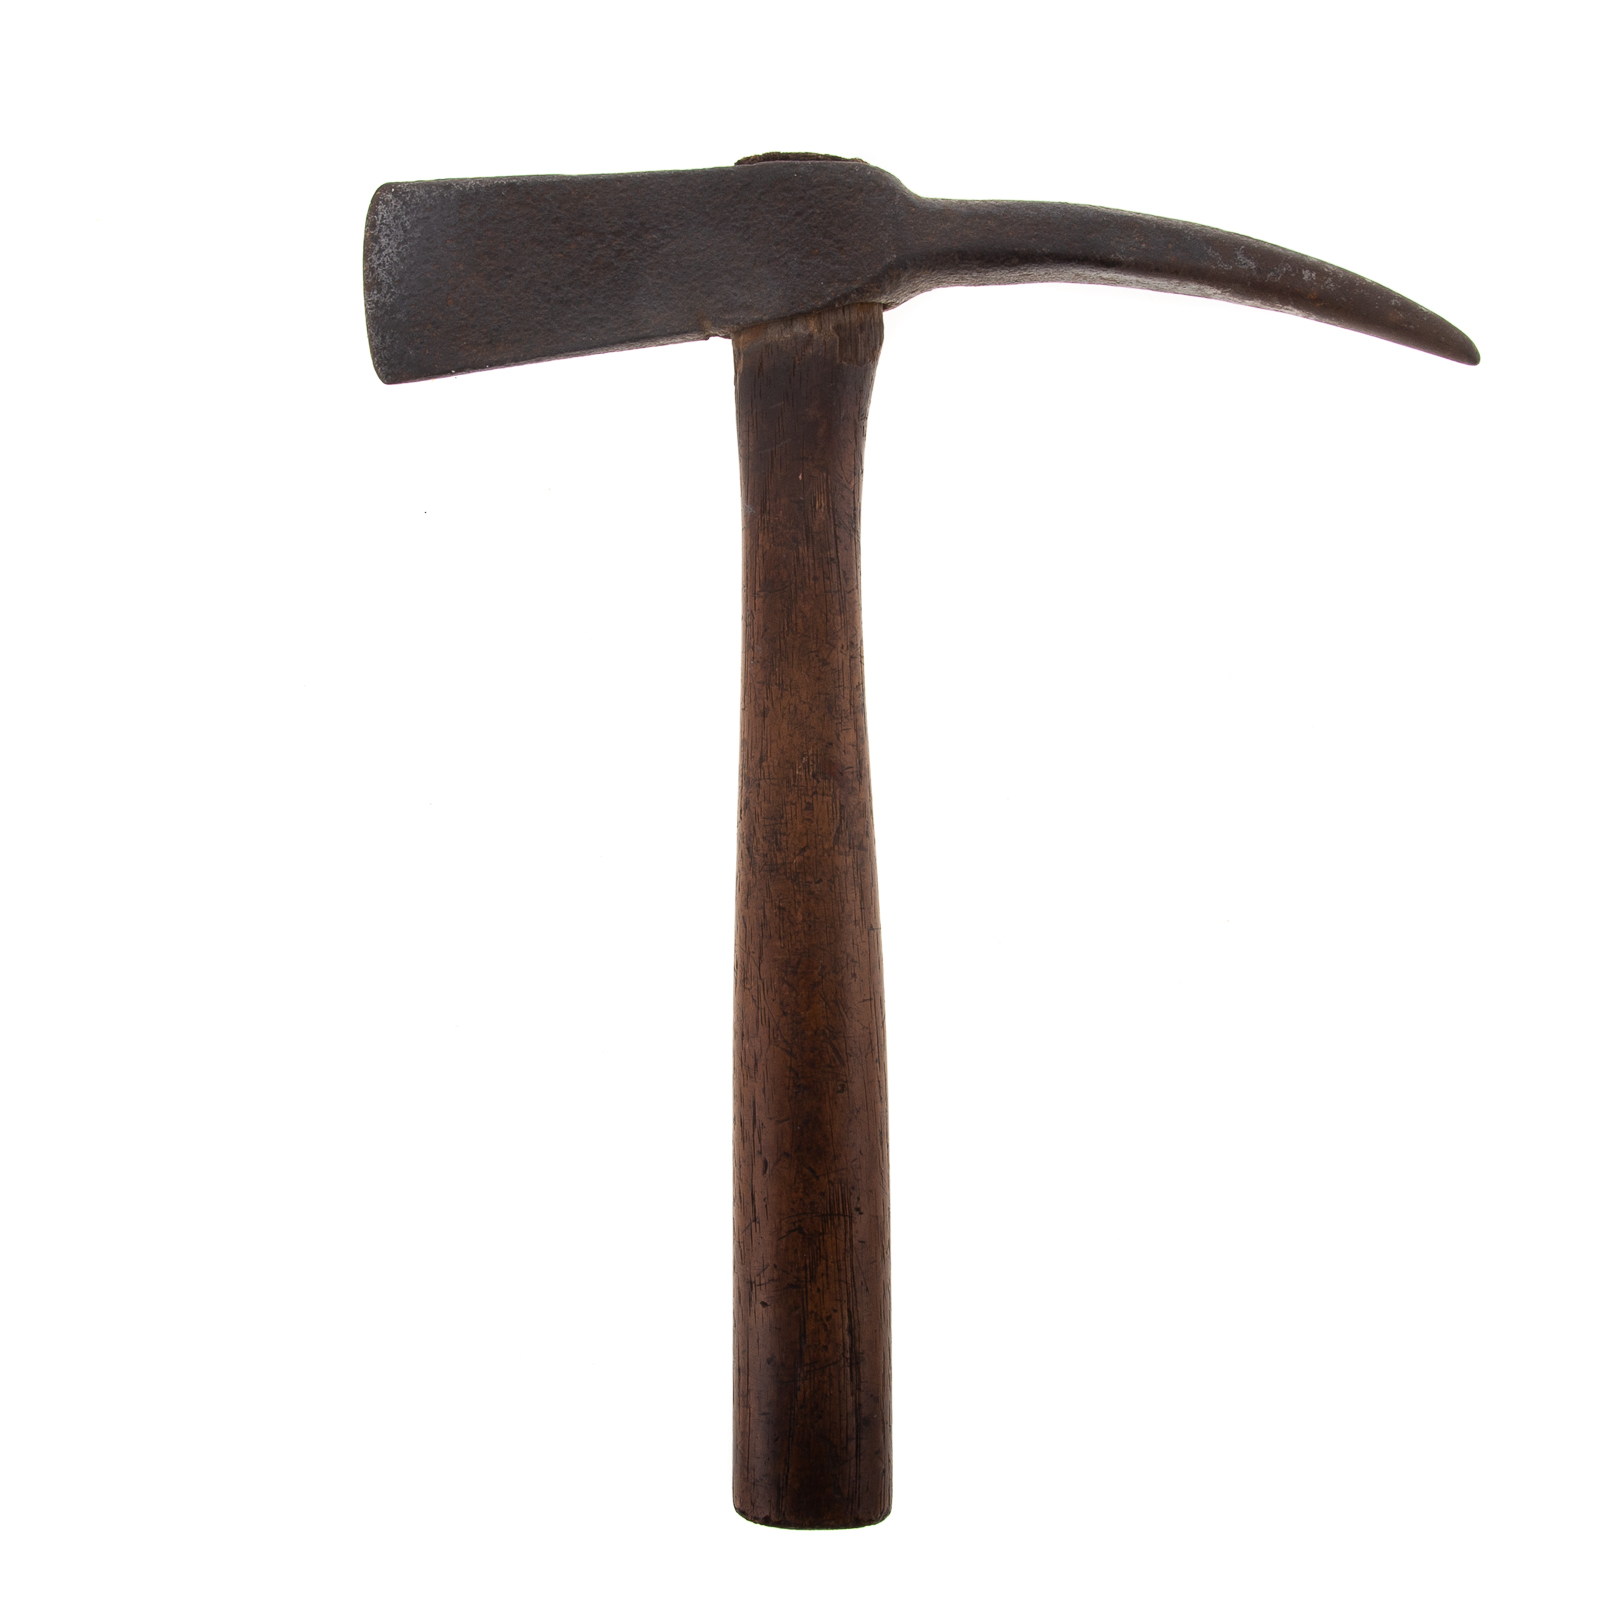 AMERICAN SPIKED TOMAHAWK MID 18TH 335434